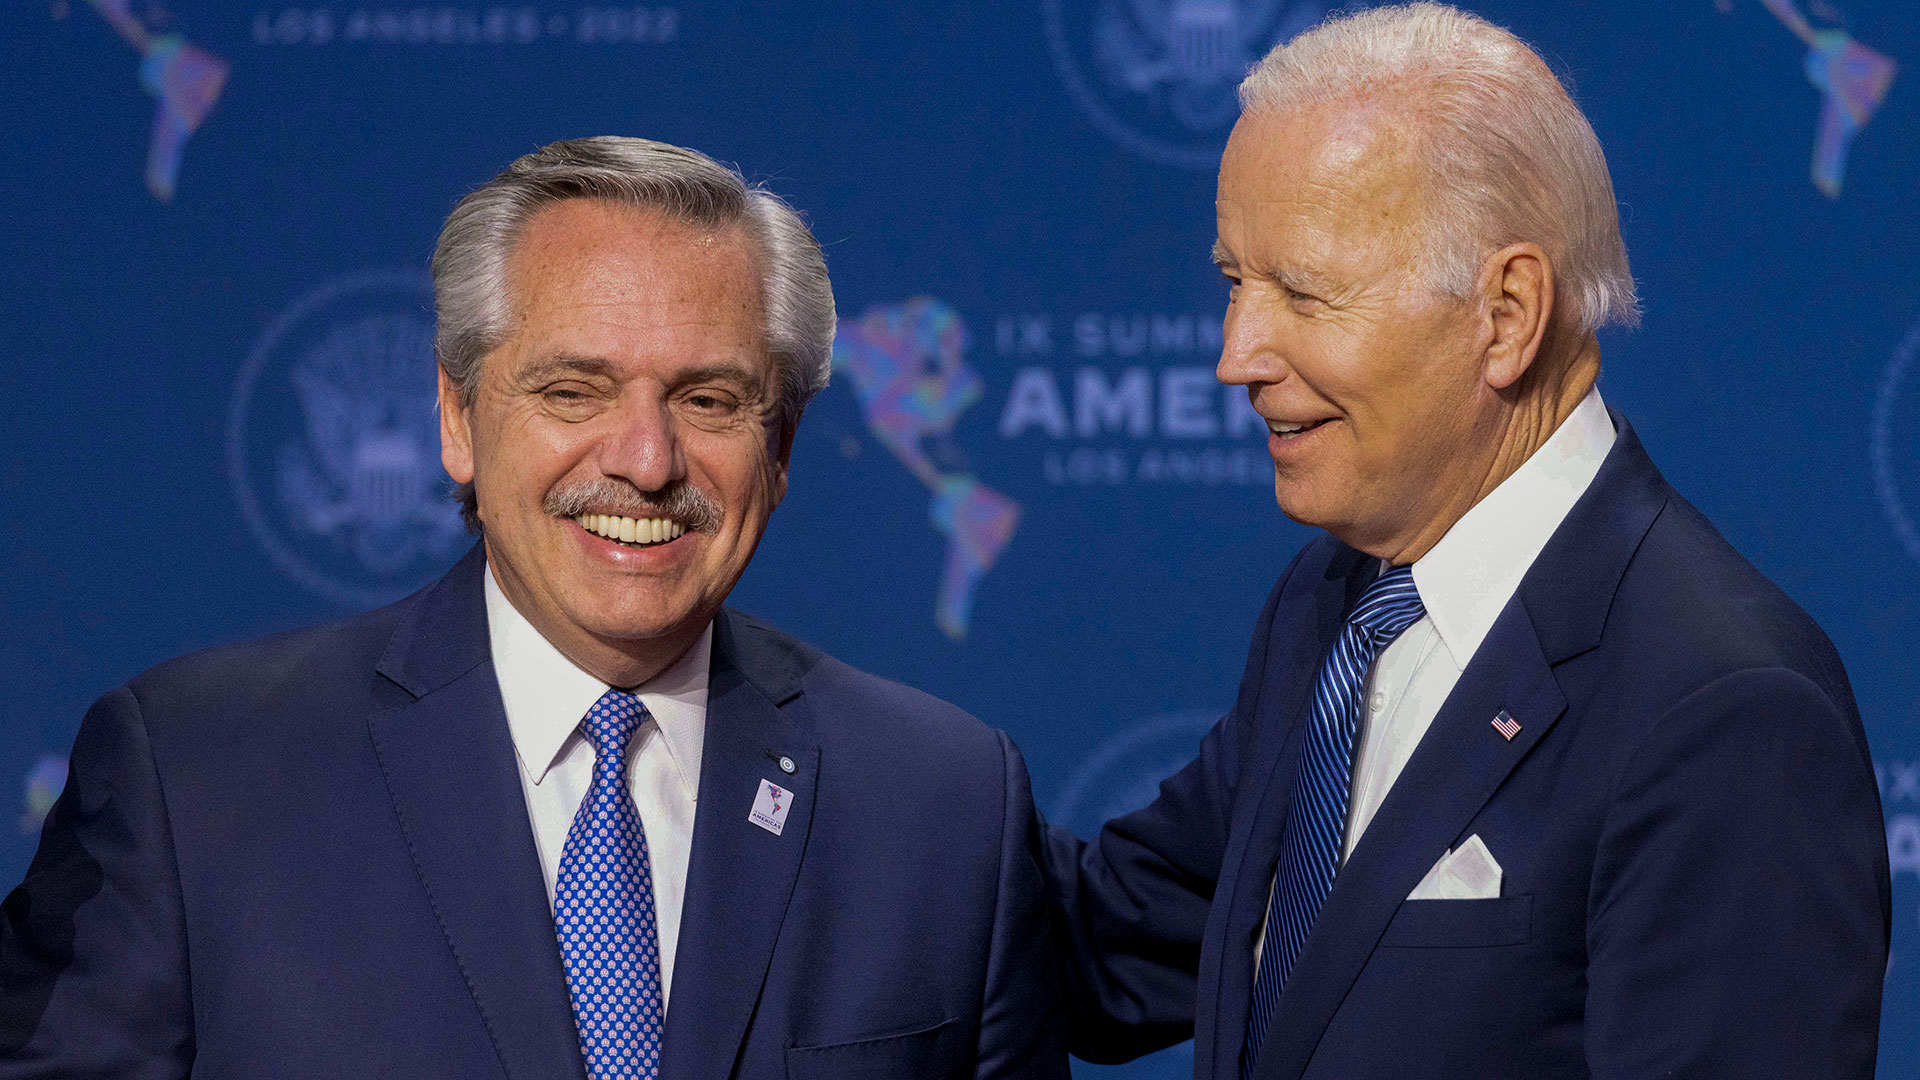 Alberto Fernández and Joseph Biden during the opening of the Summit of the Americas in Los Angeles